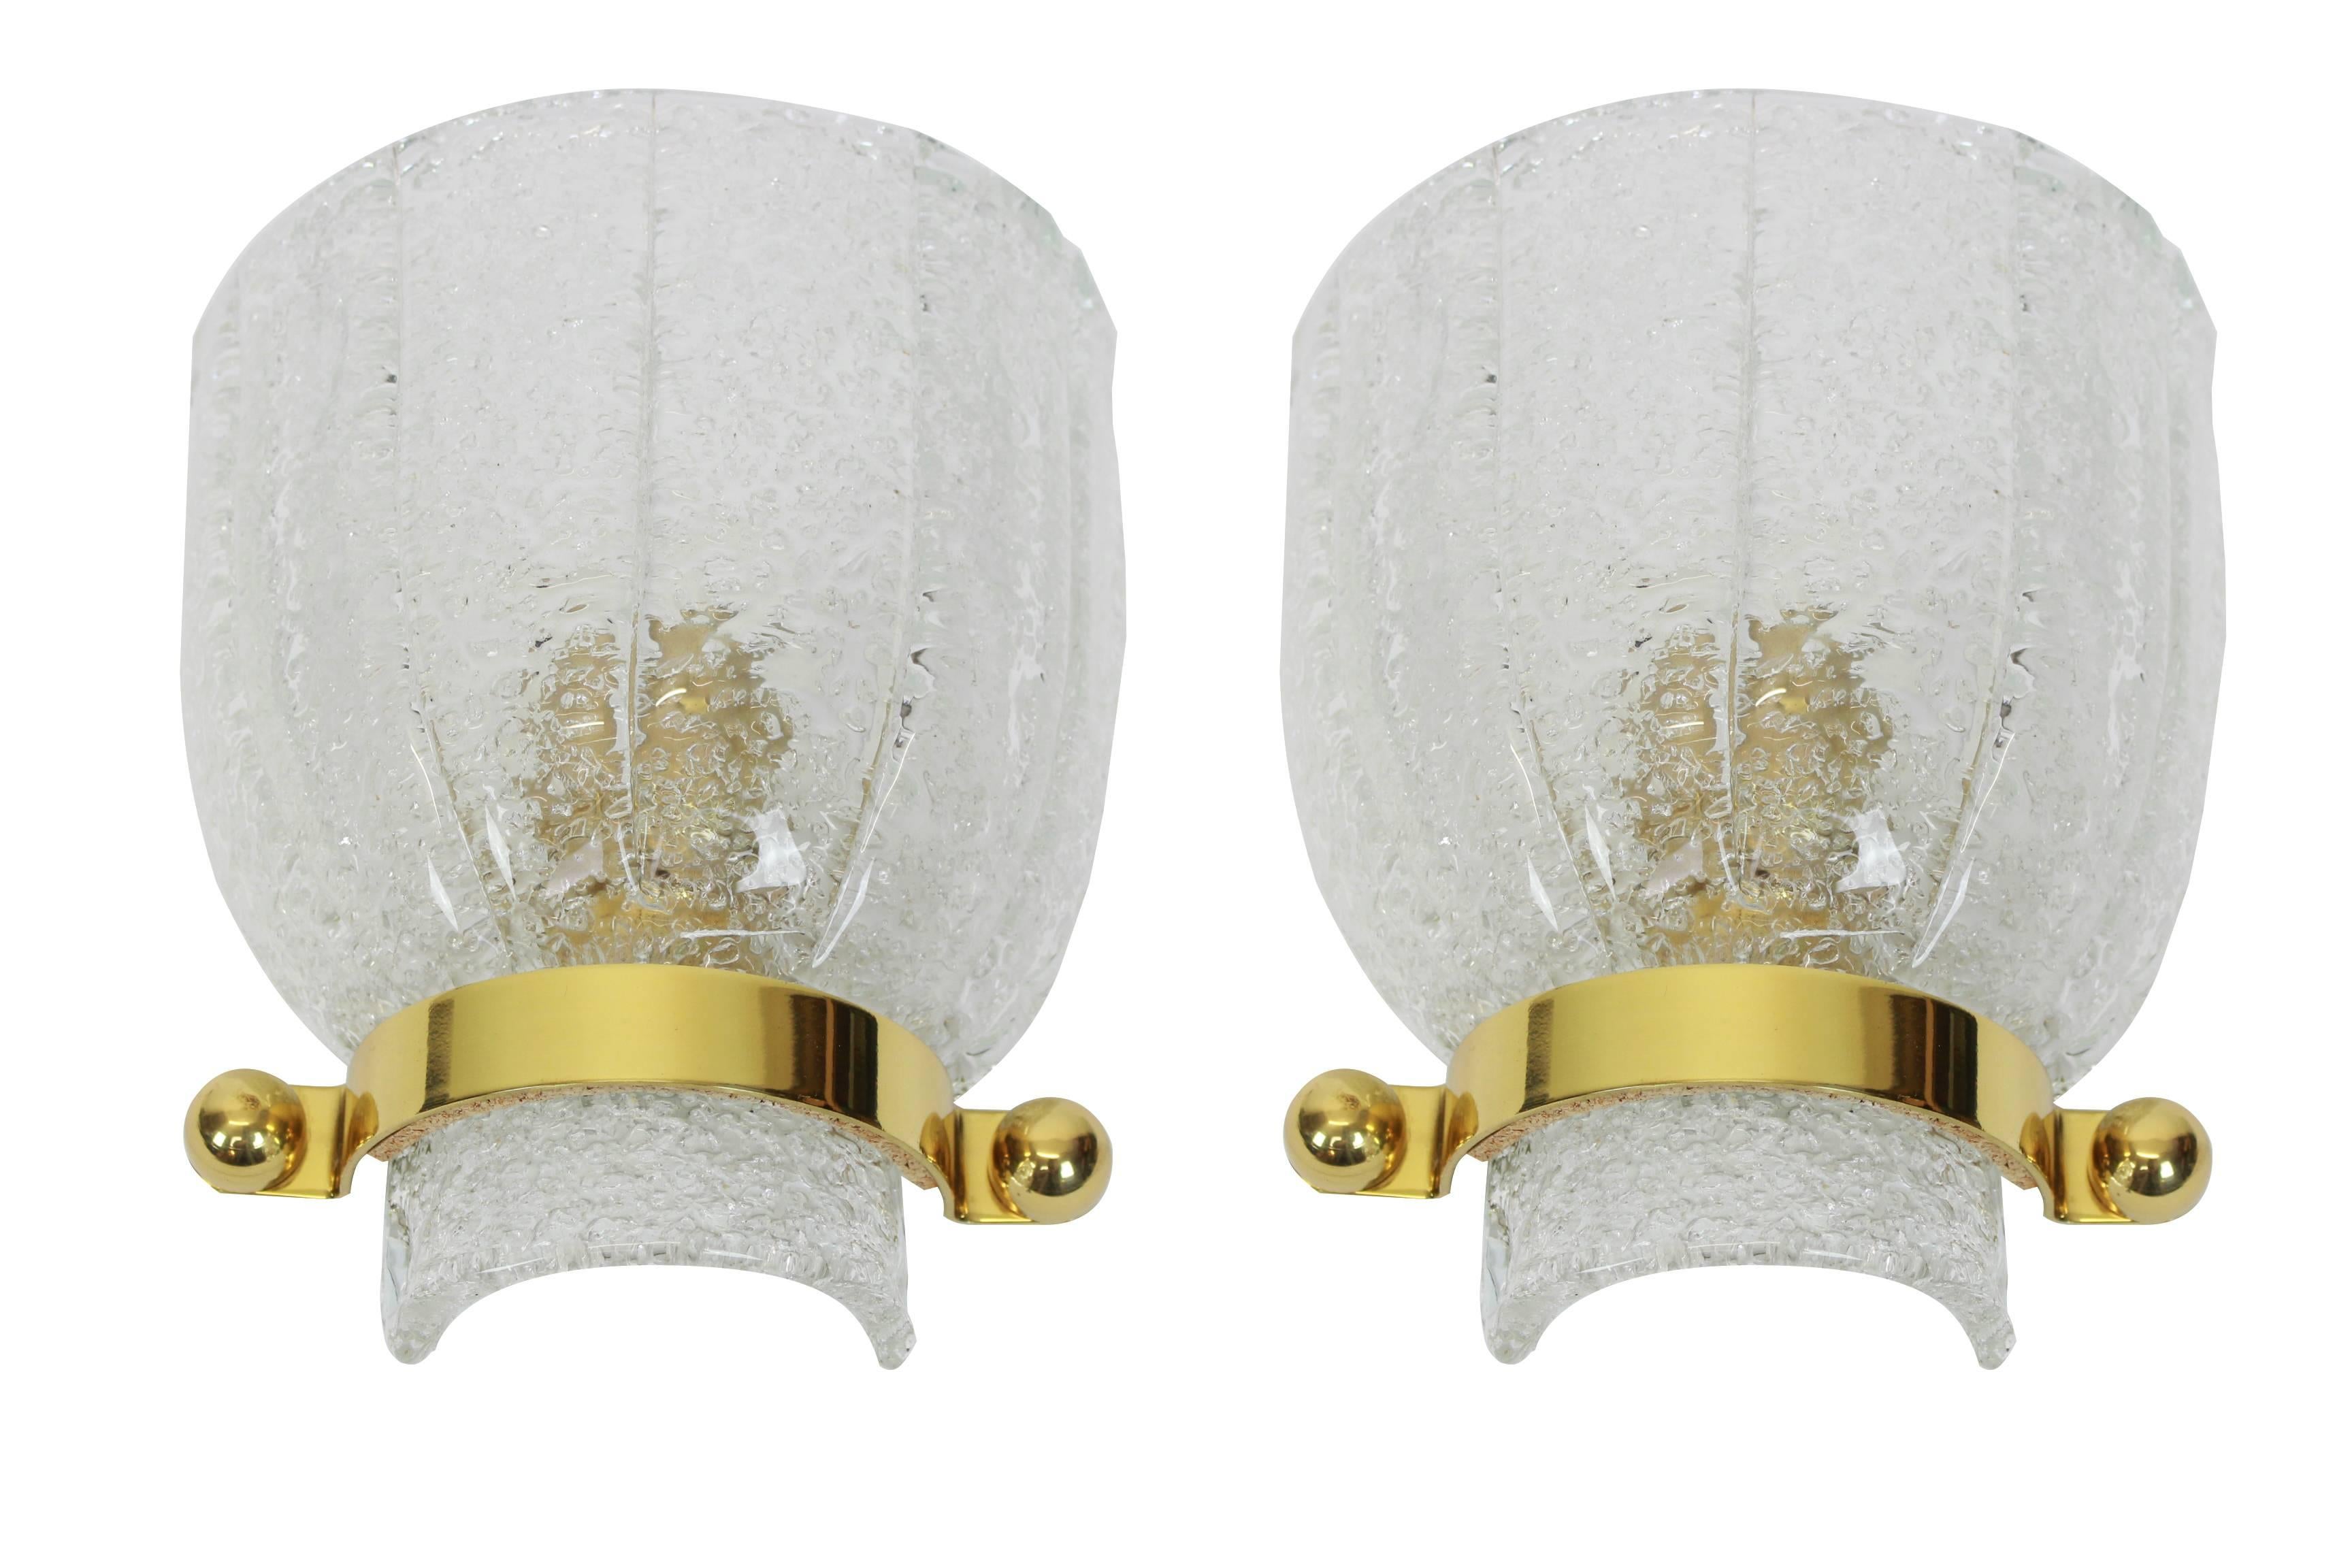 Wonderful pair of midcentury brass wall sconces with ice glass, made by Kalmar, Austria, manufactured, circa 1960-1969.

High quality and in very good condition. Cleaned, well-wired and ready to use. 

Each sconce requires 1 x E14 standard bulbs